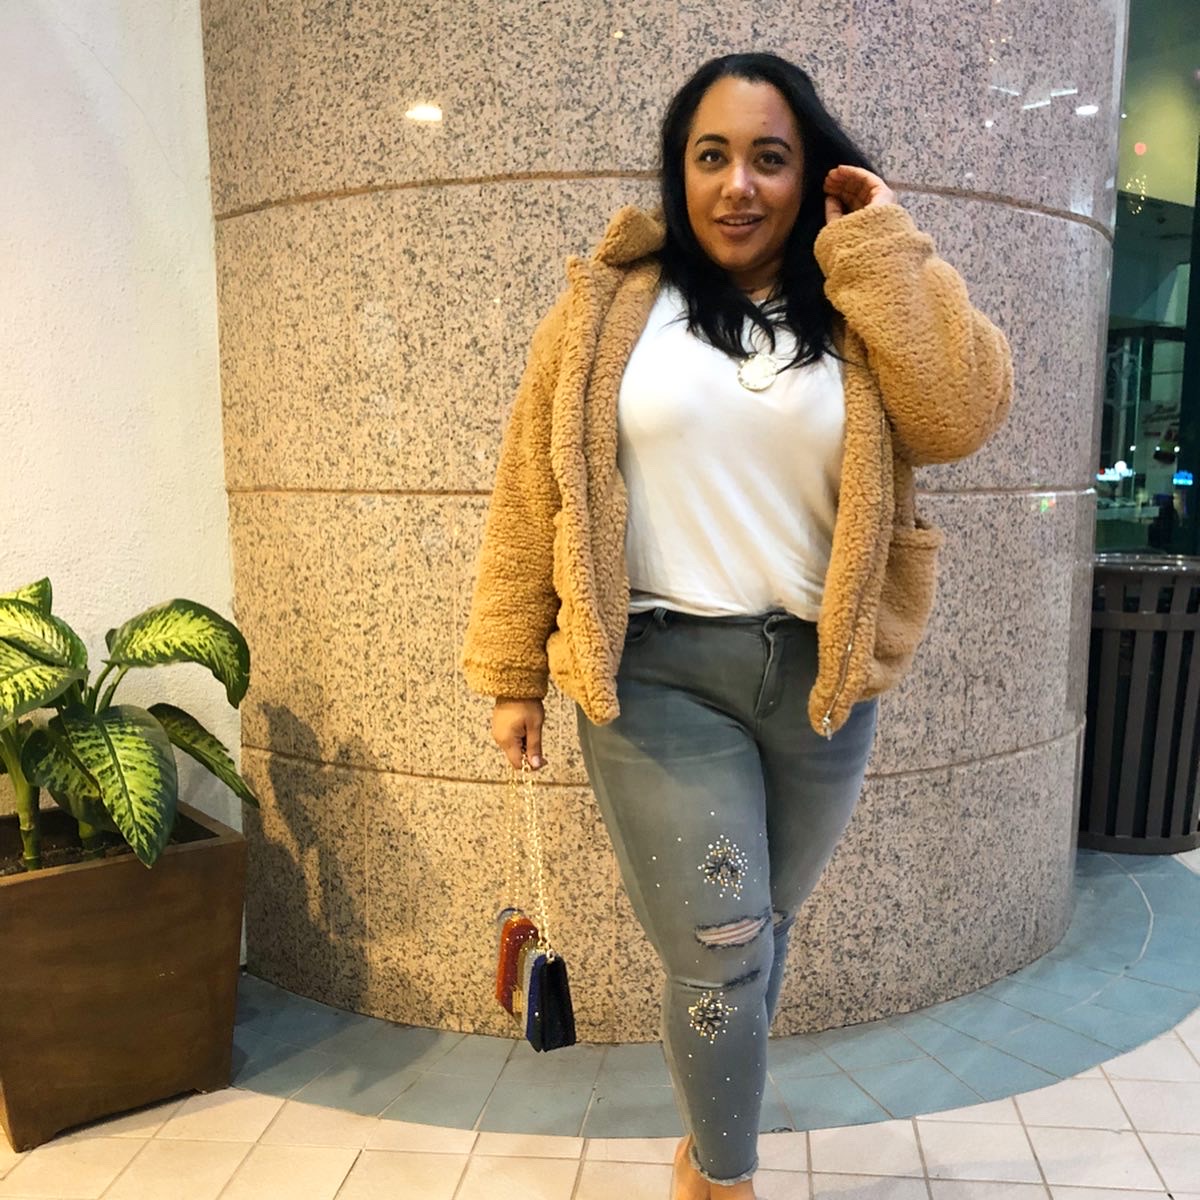 Plus size fashion blogger and journalist, Amy Stretten, aka The Chief of Style, wearing a teddybear coat, rhinestone embellished distressed skinny jeans from Lane Bryant, and clear heels while carrying a rhinestone encrusted rainbow purse in Sherman Oaks, California